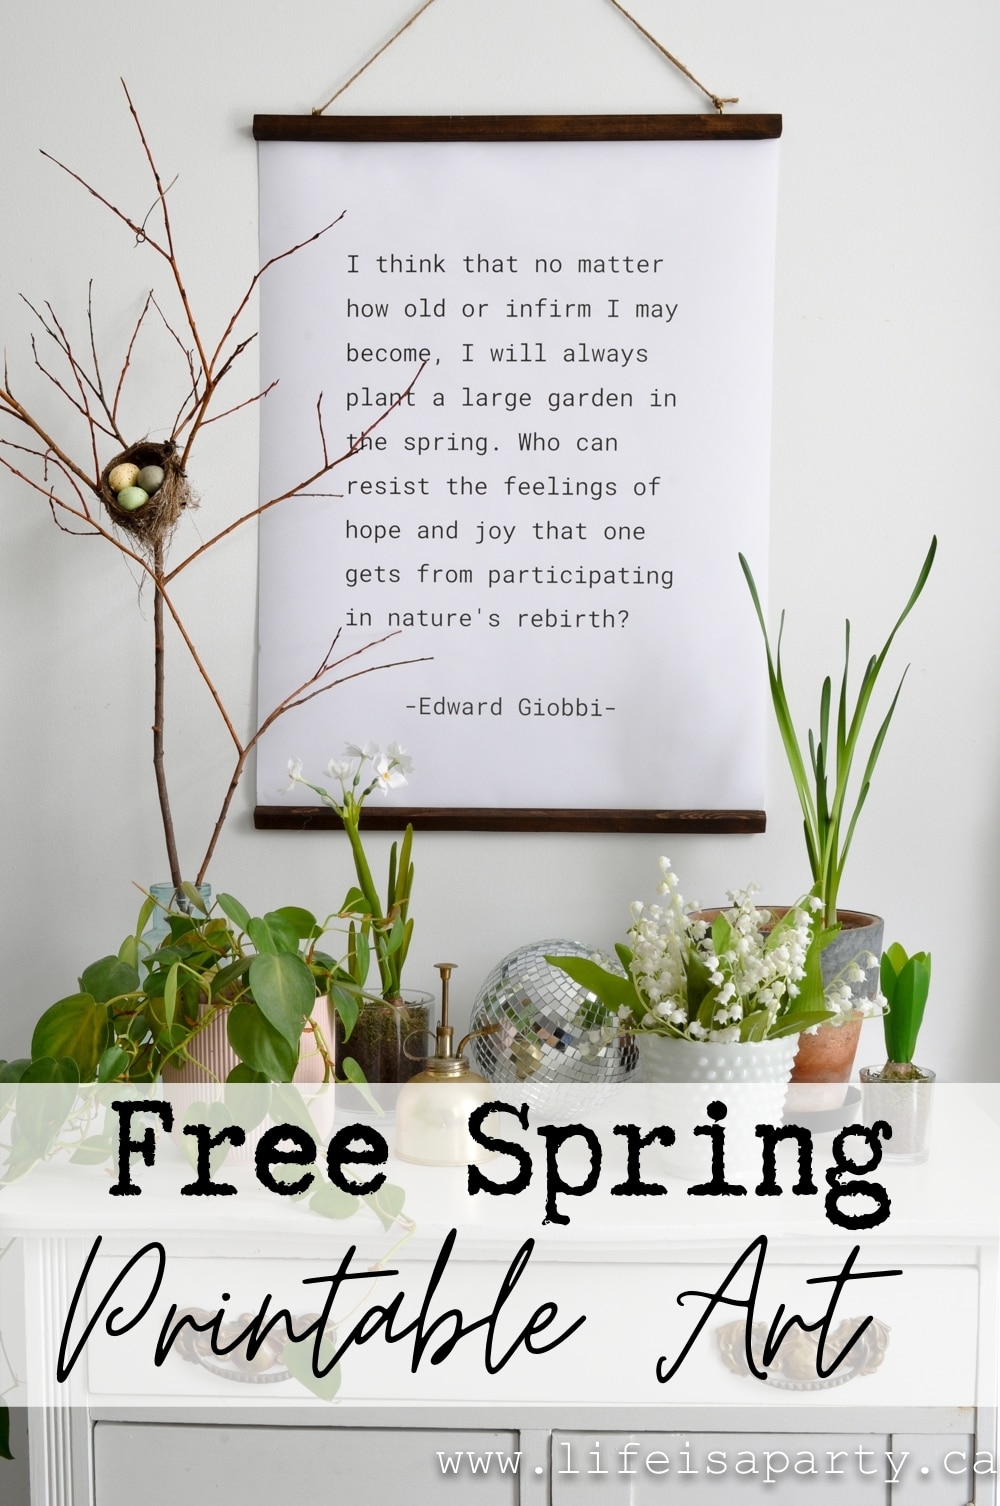 Free Spring Printable Art: decorate for spring with this inspiring free printable available in large 18 x 24 inch or letter size.